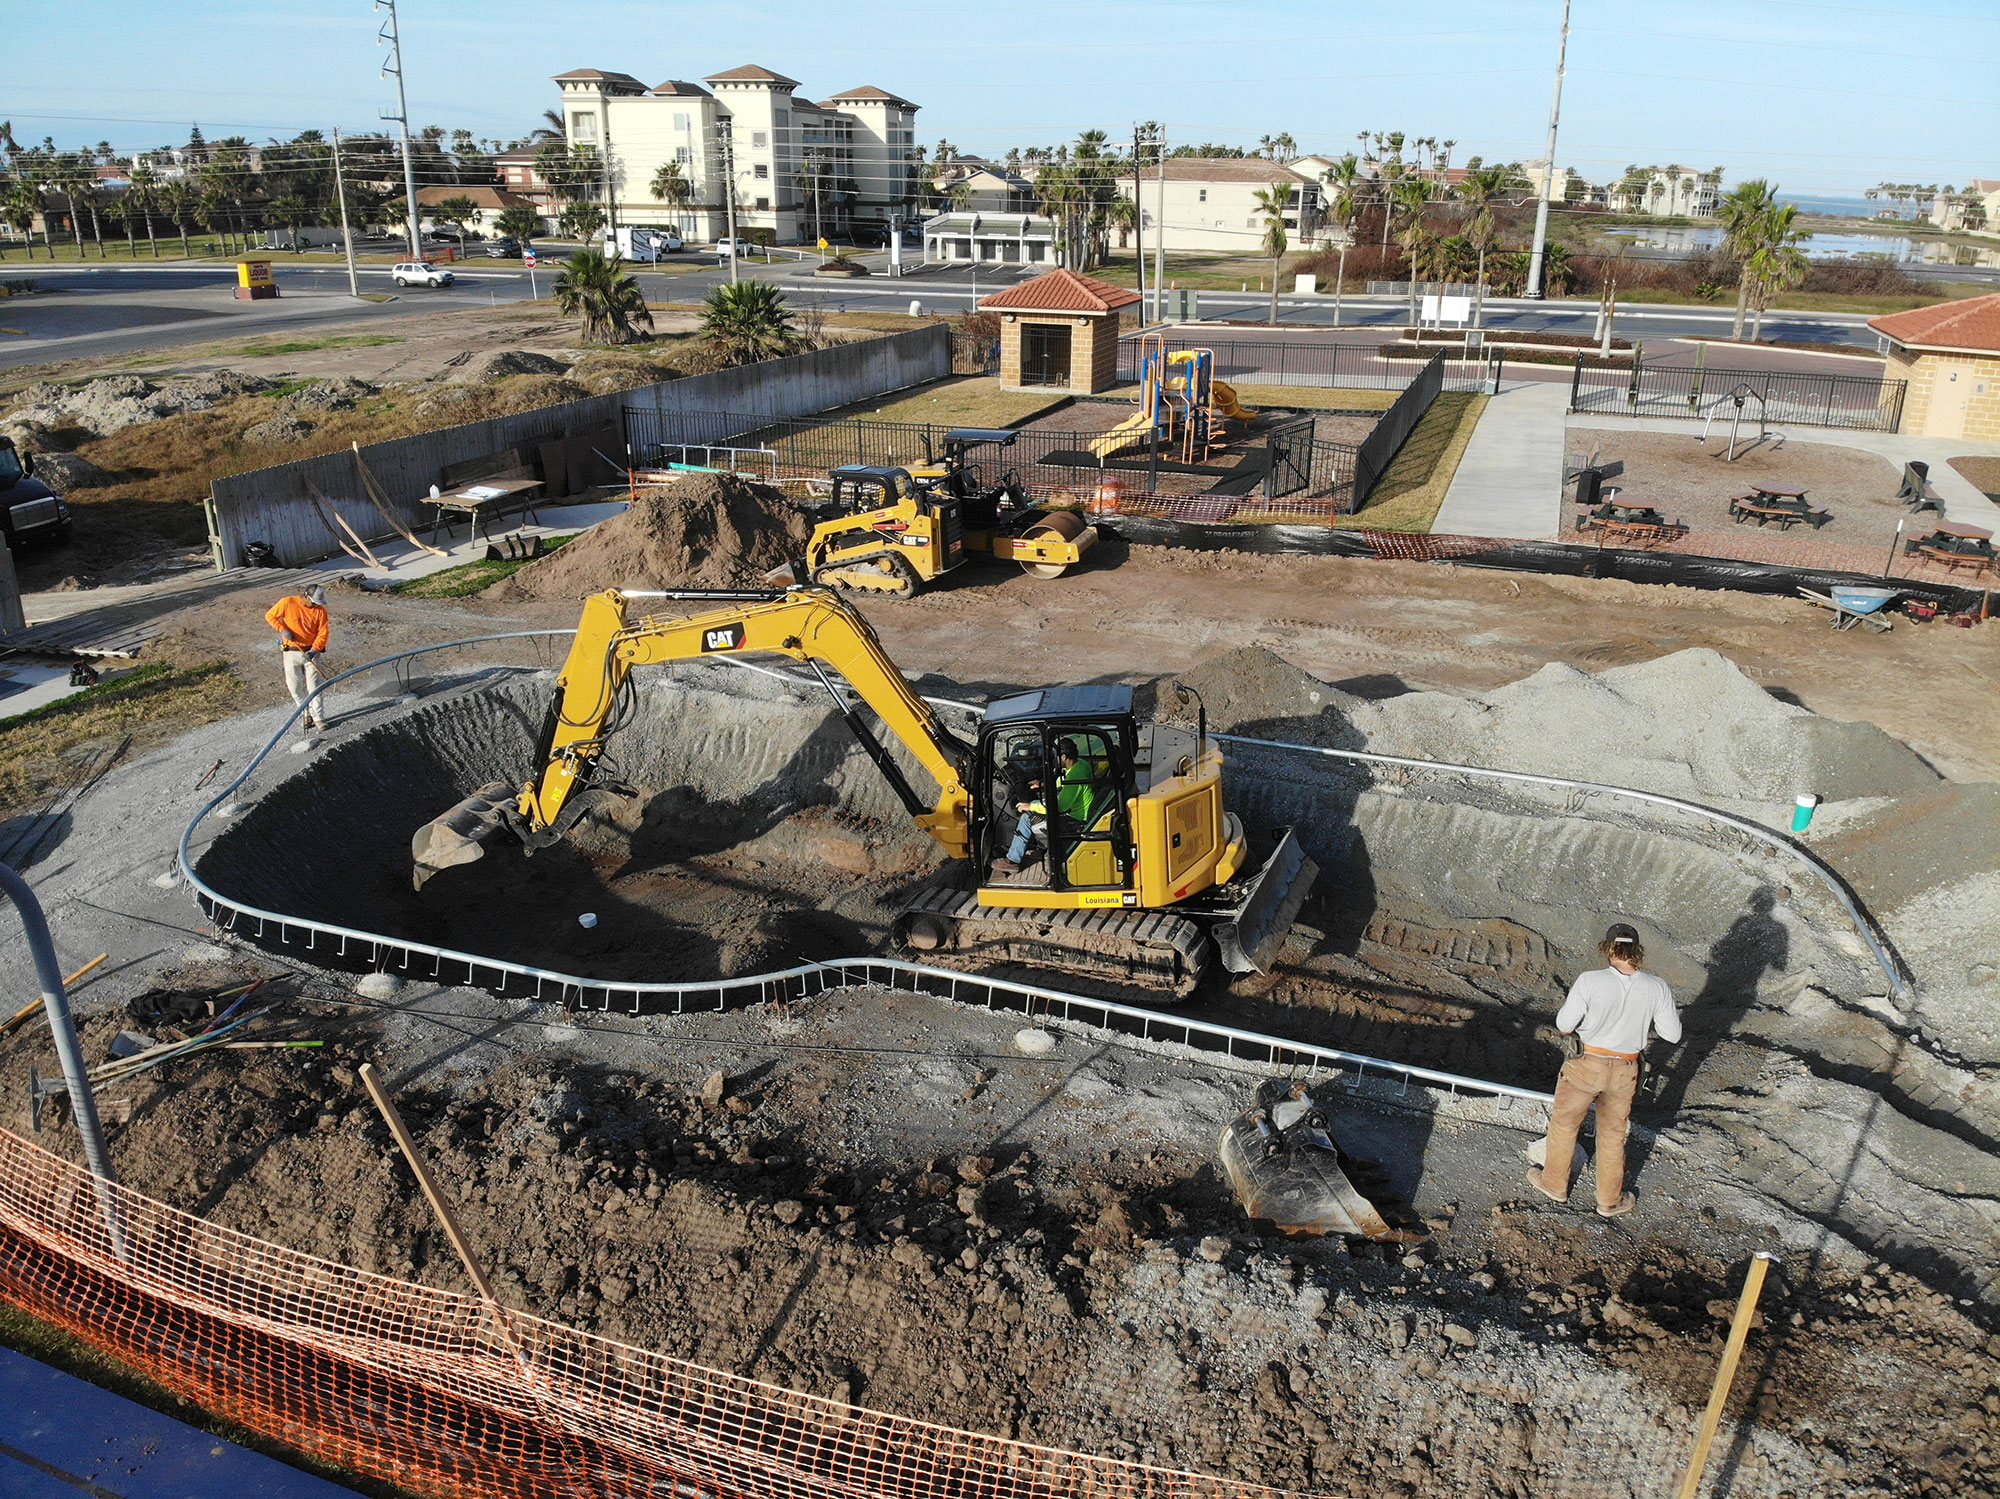 South Padre Island skatepark to be completed in May